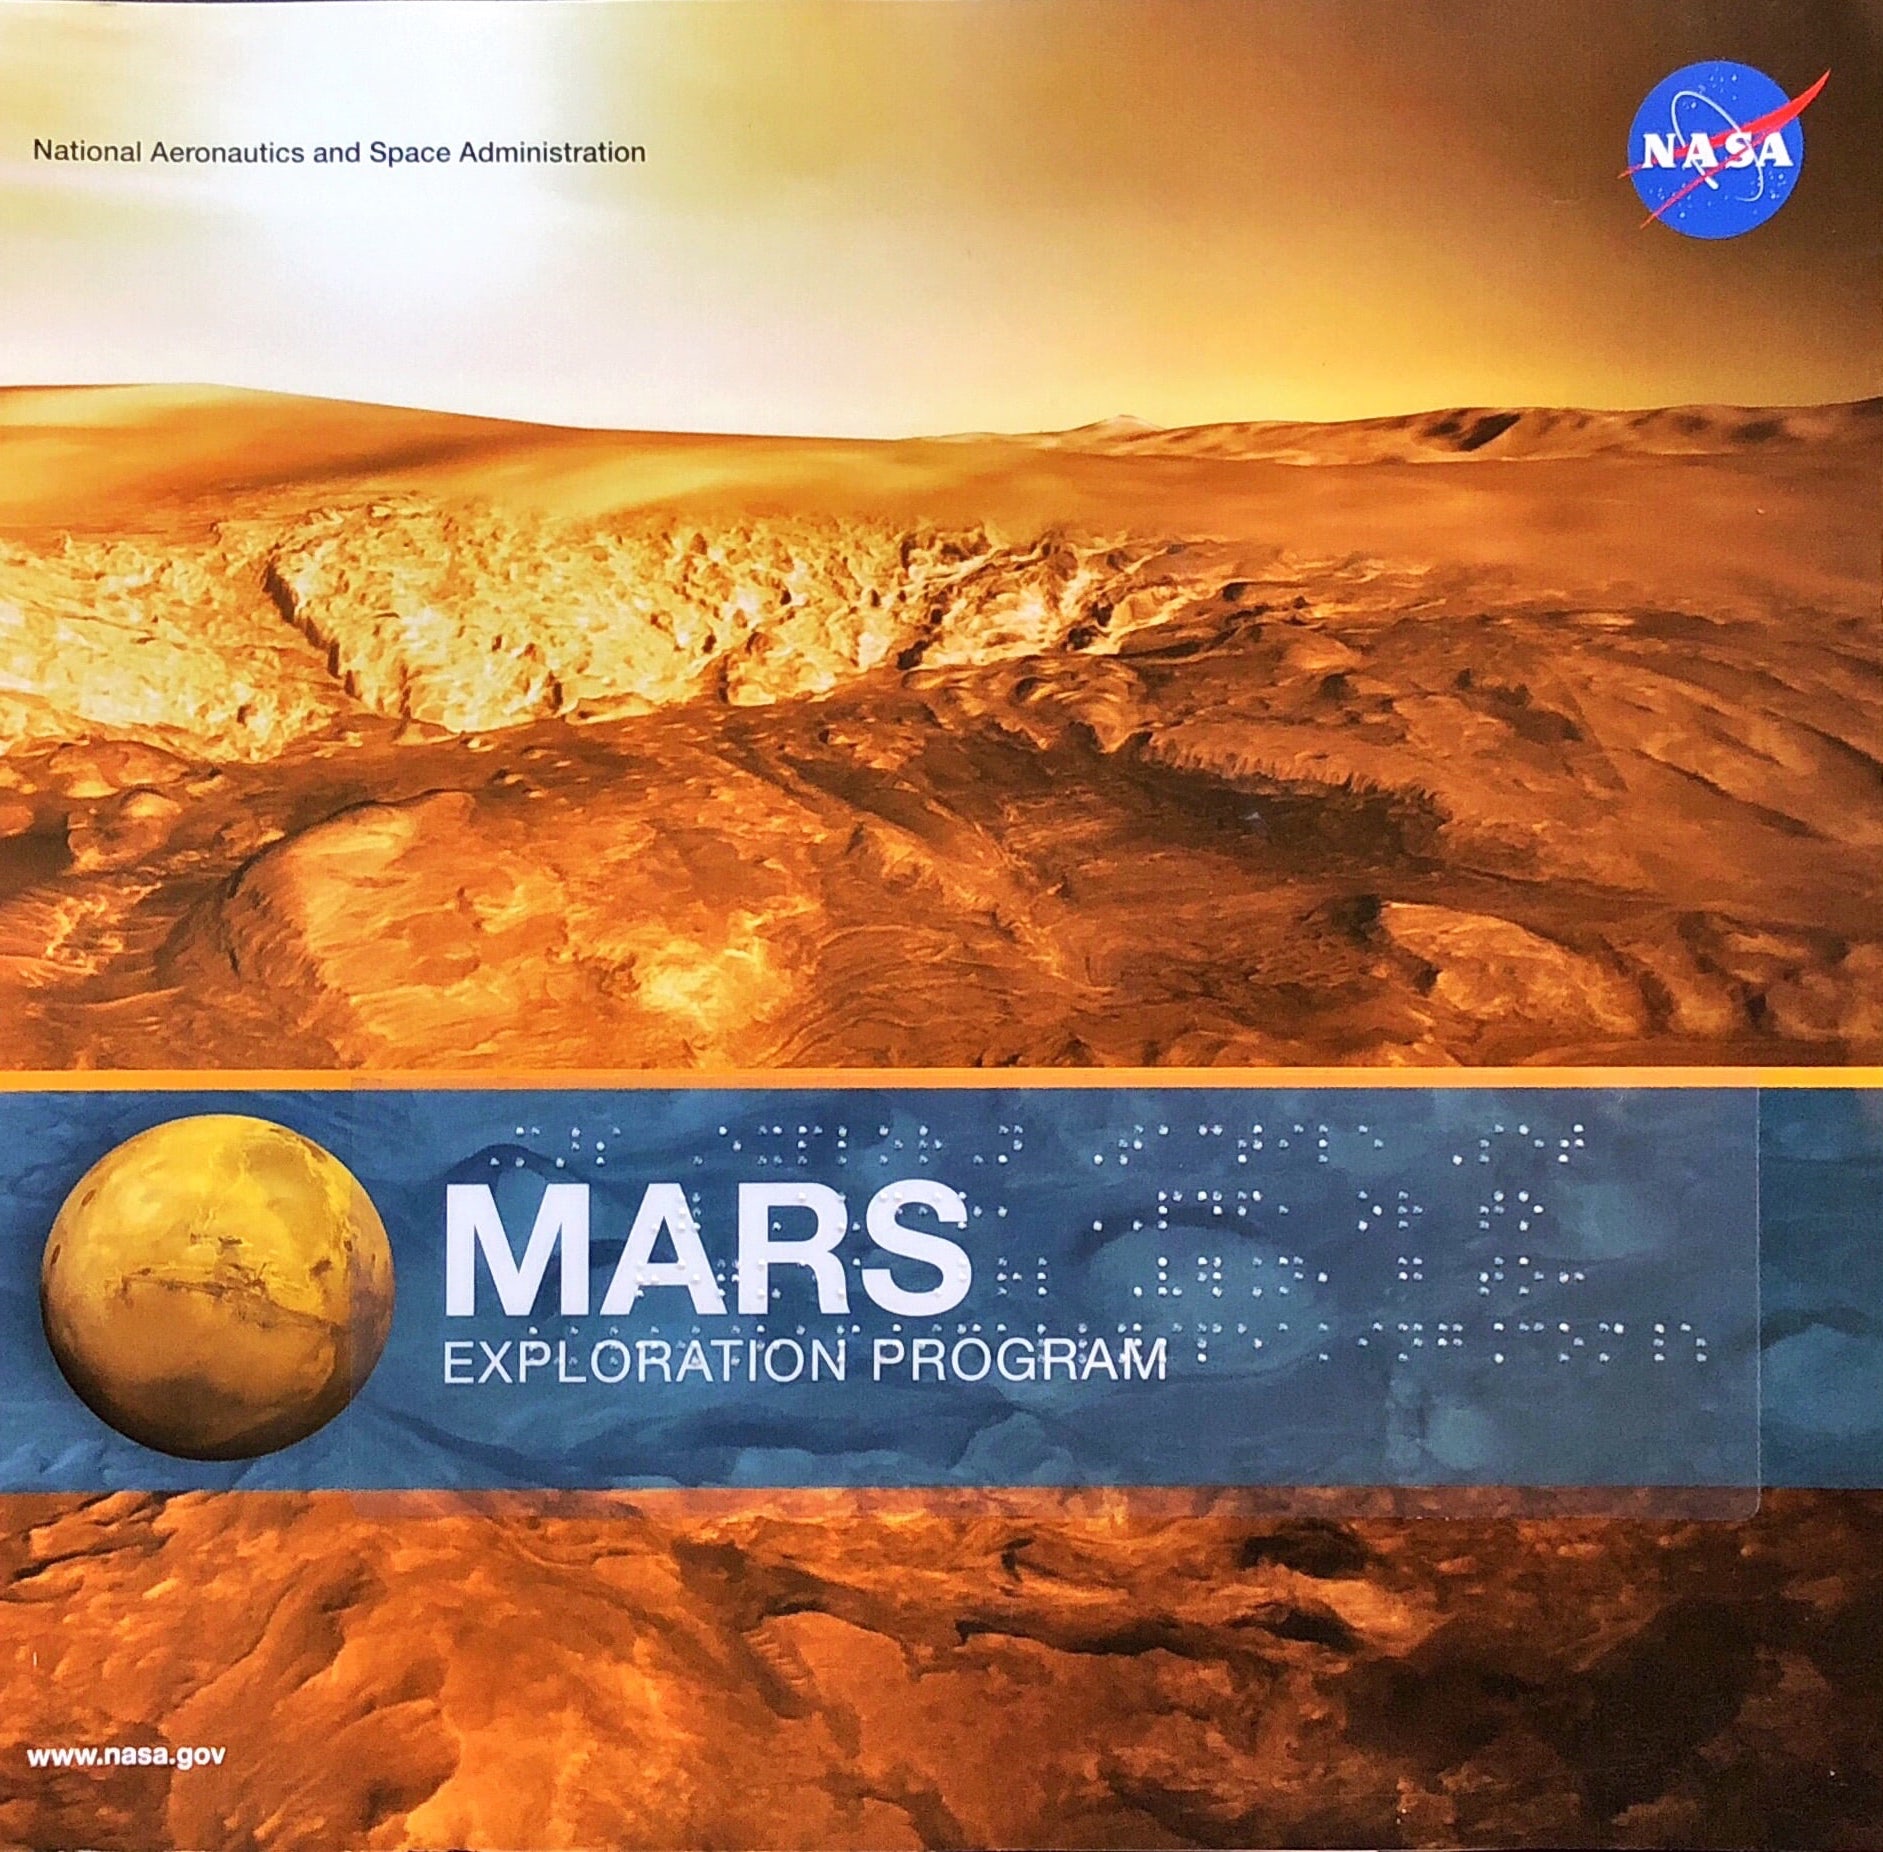 The cover image of the Mars Exploration Program book